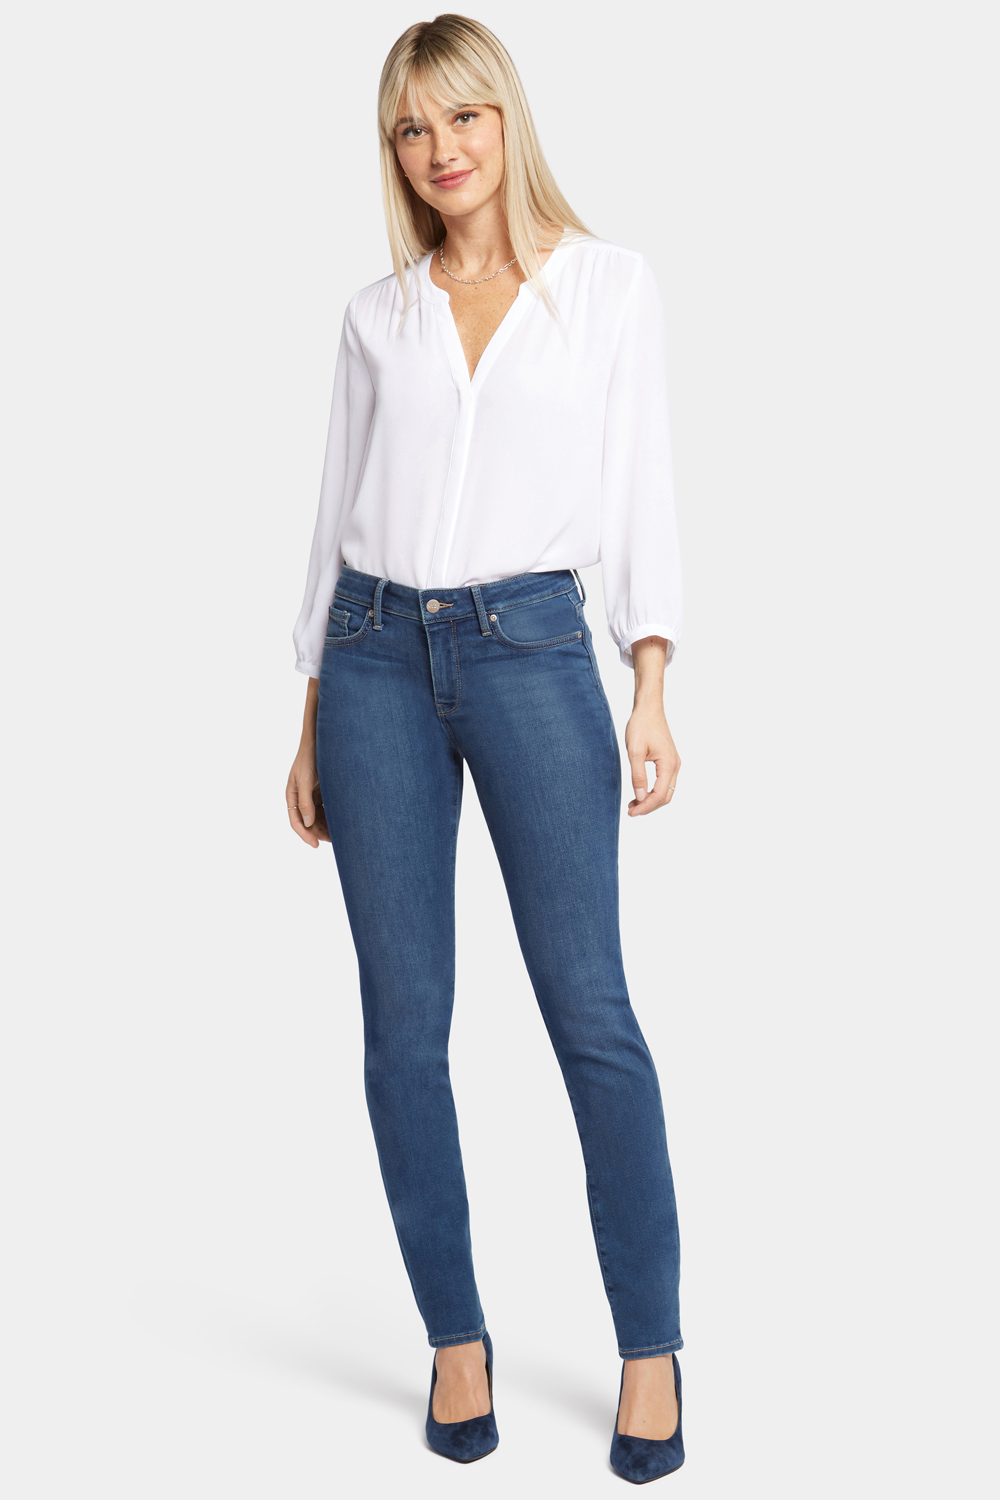 Buy NJ's Women Blue Relaxed fit Jeans Online at Low Prices in India -  Paytmmall.com